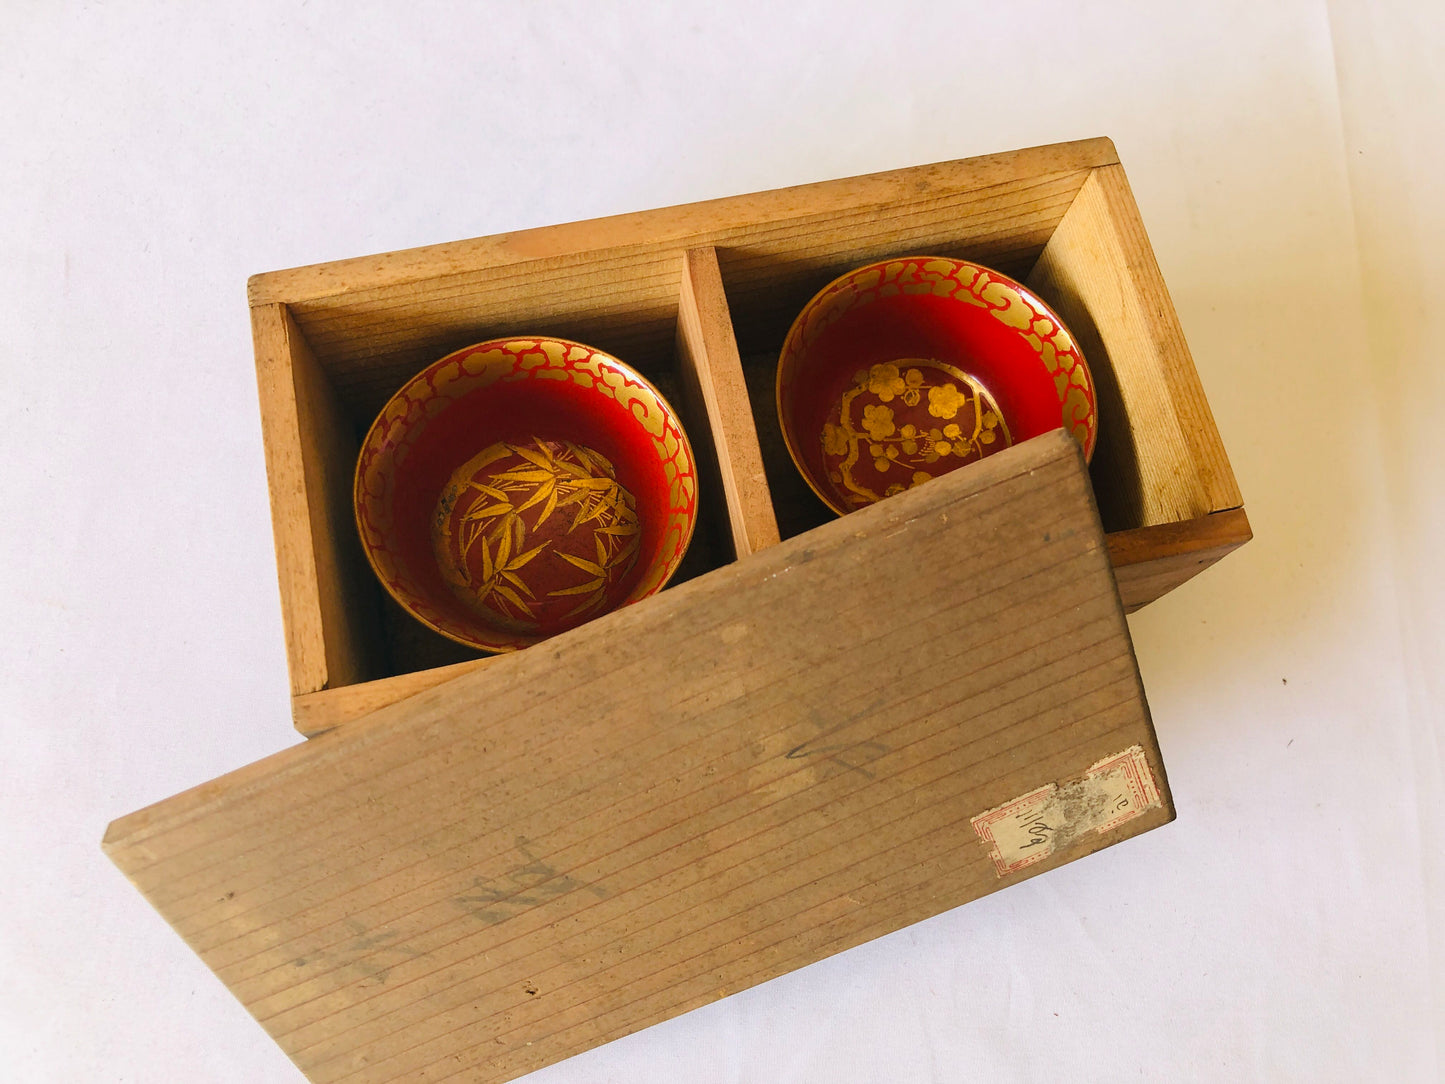 Y4957 CHAWAN sake cup set of 2 box vermillion gold makie lacquer Japan antique